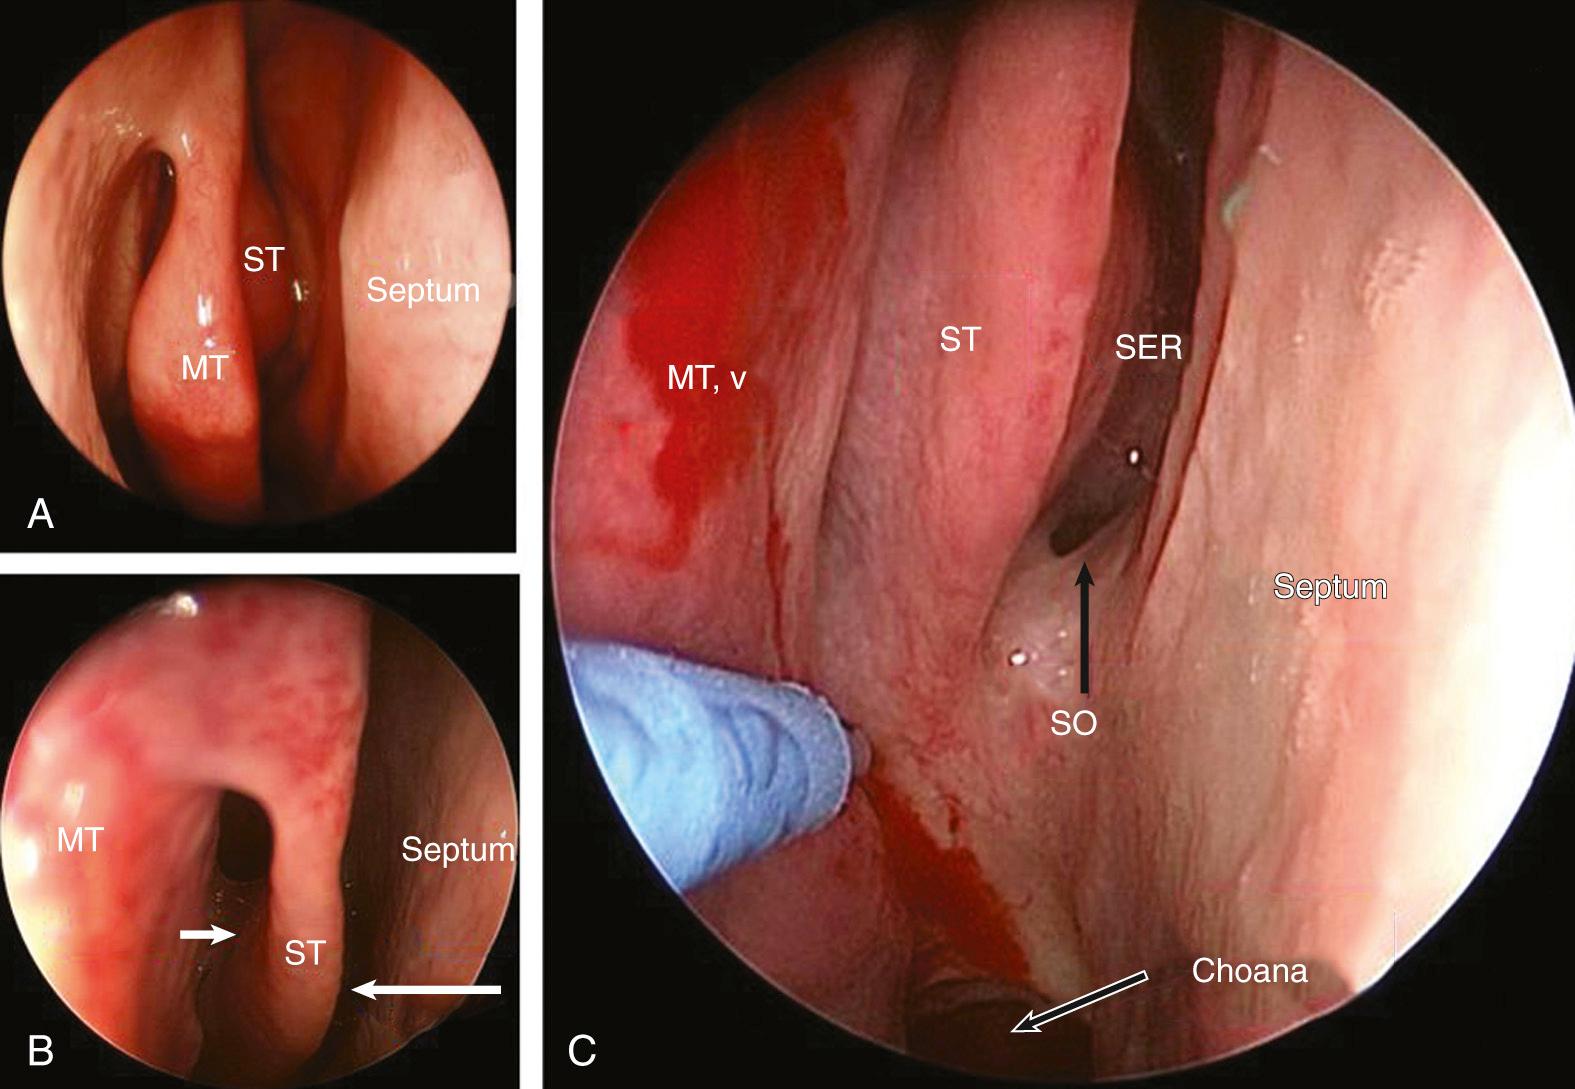 Fig. 44.6, Endoscopic transnasal view of the right superior turbinate (ST) and superior meatus, showing progressively closer posterior views in (A) through (C). Anteriorly, the superior turbinate shares a skull base attachment with the middle turbinate (MT) and runs in a sagittal plane like the middle turbinate. The superior meatus ( small arrow in B) is, therefore, posterior to the medial half of the middle portion of the basal lamella of the middle turbinate. Posterior ethmoidal cells open into the superior meatus. Inferiorly, the superior turbinate forms the lateral wall of the sphenoethmoidal recess ( SER , large arrow in B), which lies between the septum medially and the superior meatus laterally. The sphenoid ostium (SO) opens into the sphenoethmoidal recess. MT,v, middle turbinate, vertical part.